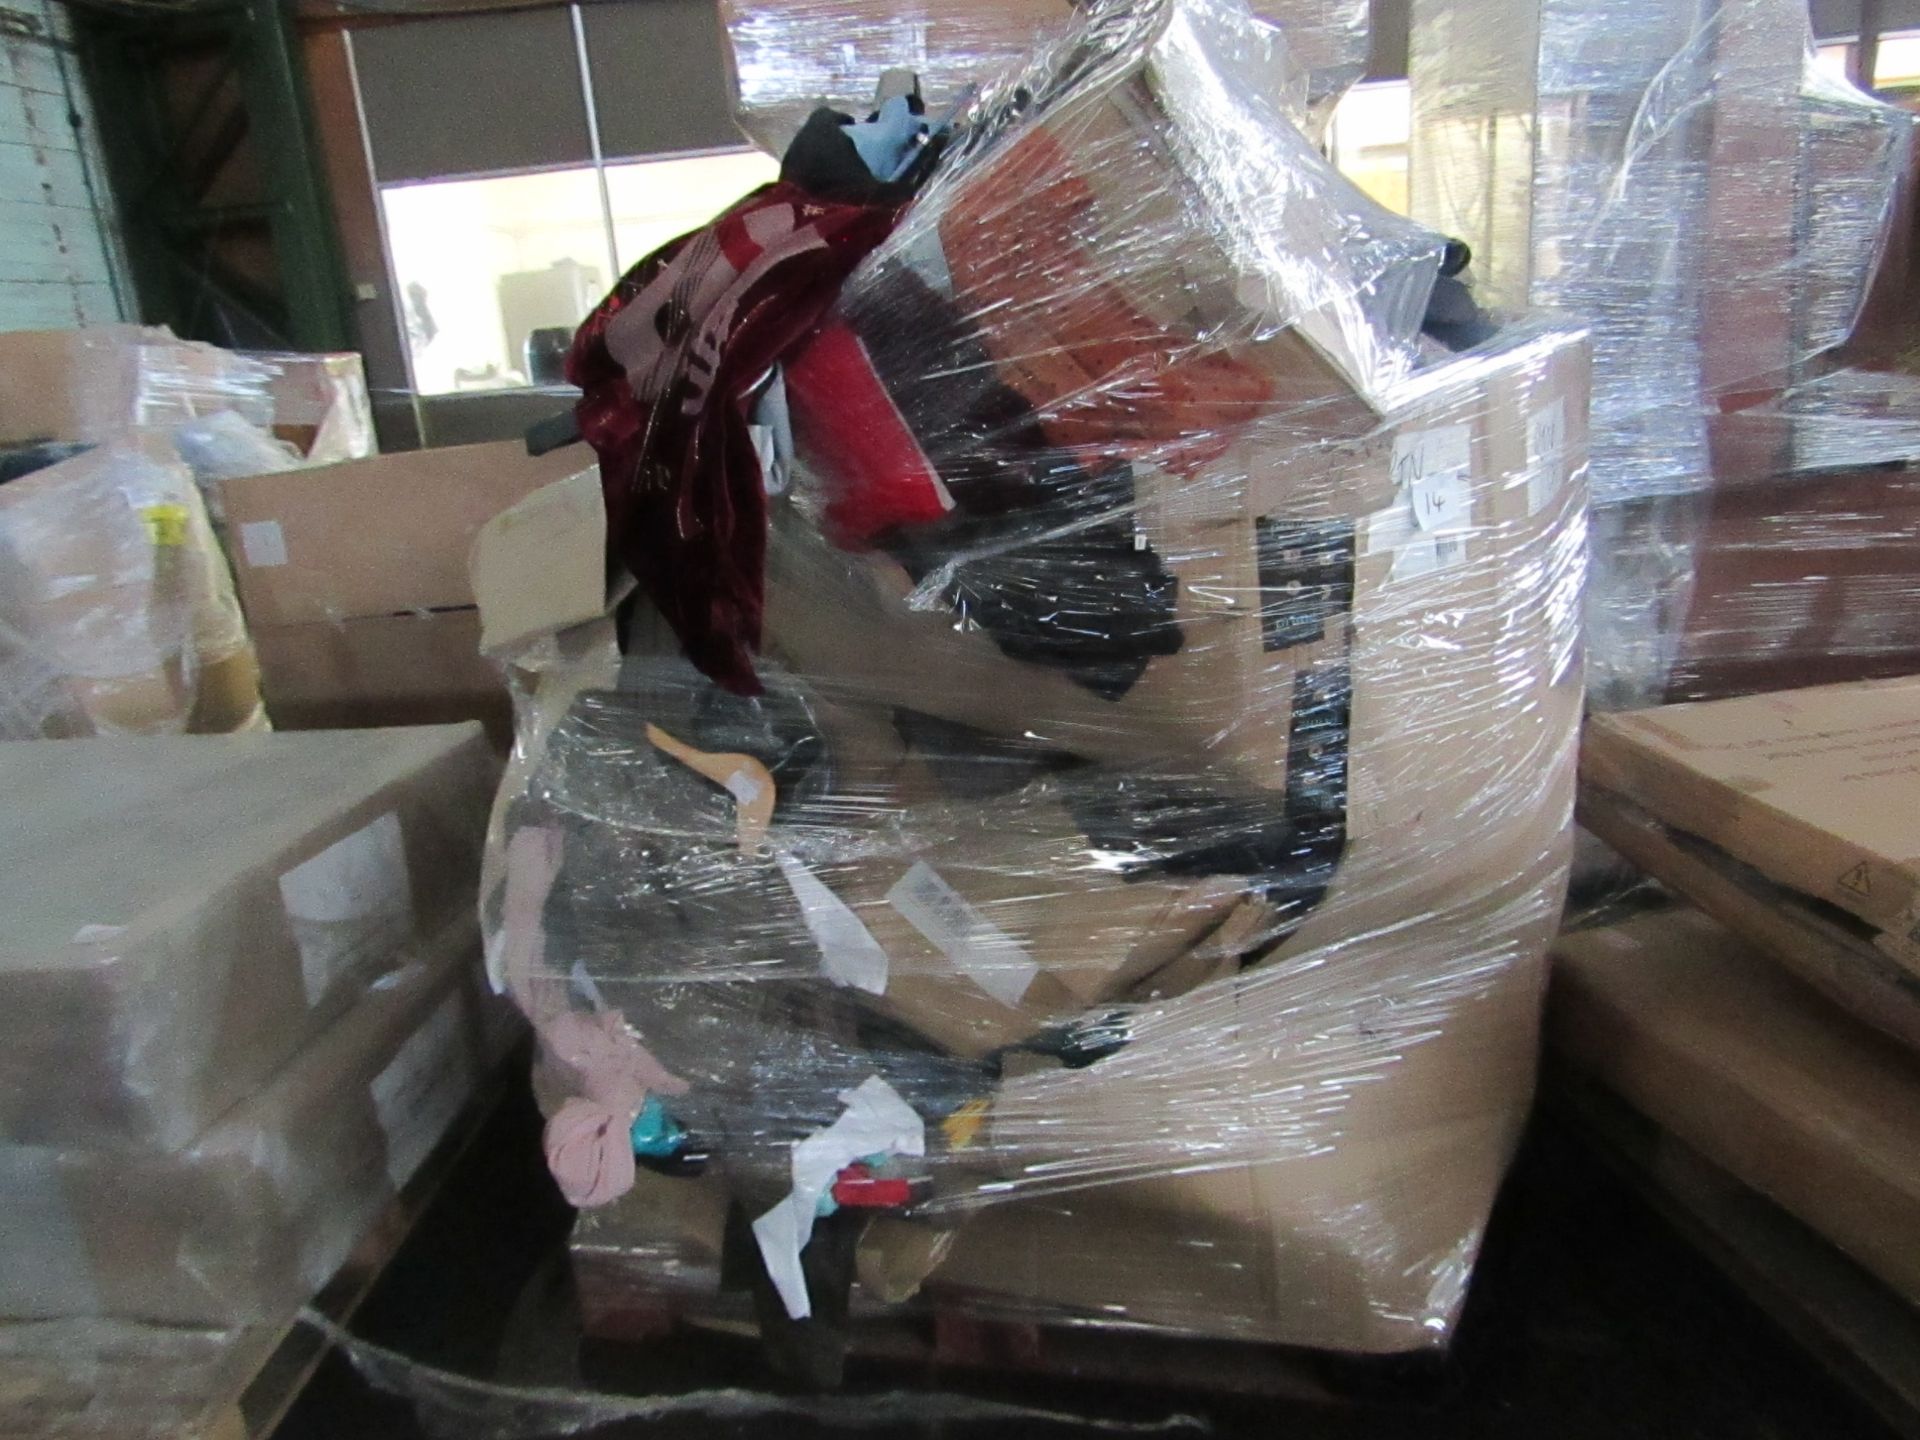 PALLET CONTAING LOTS OF CLOTHING ITEMS AND MISC ITEMS. ALL UNCHECKED